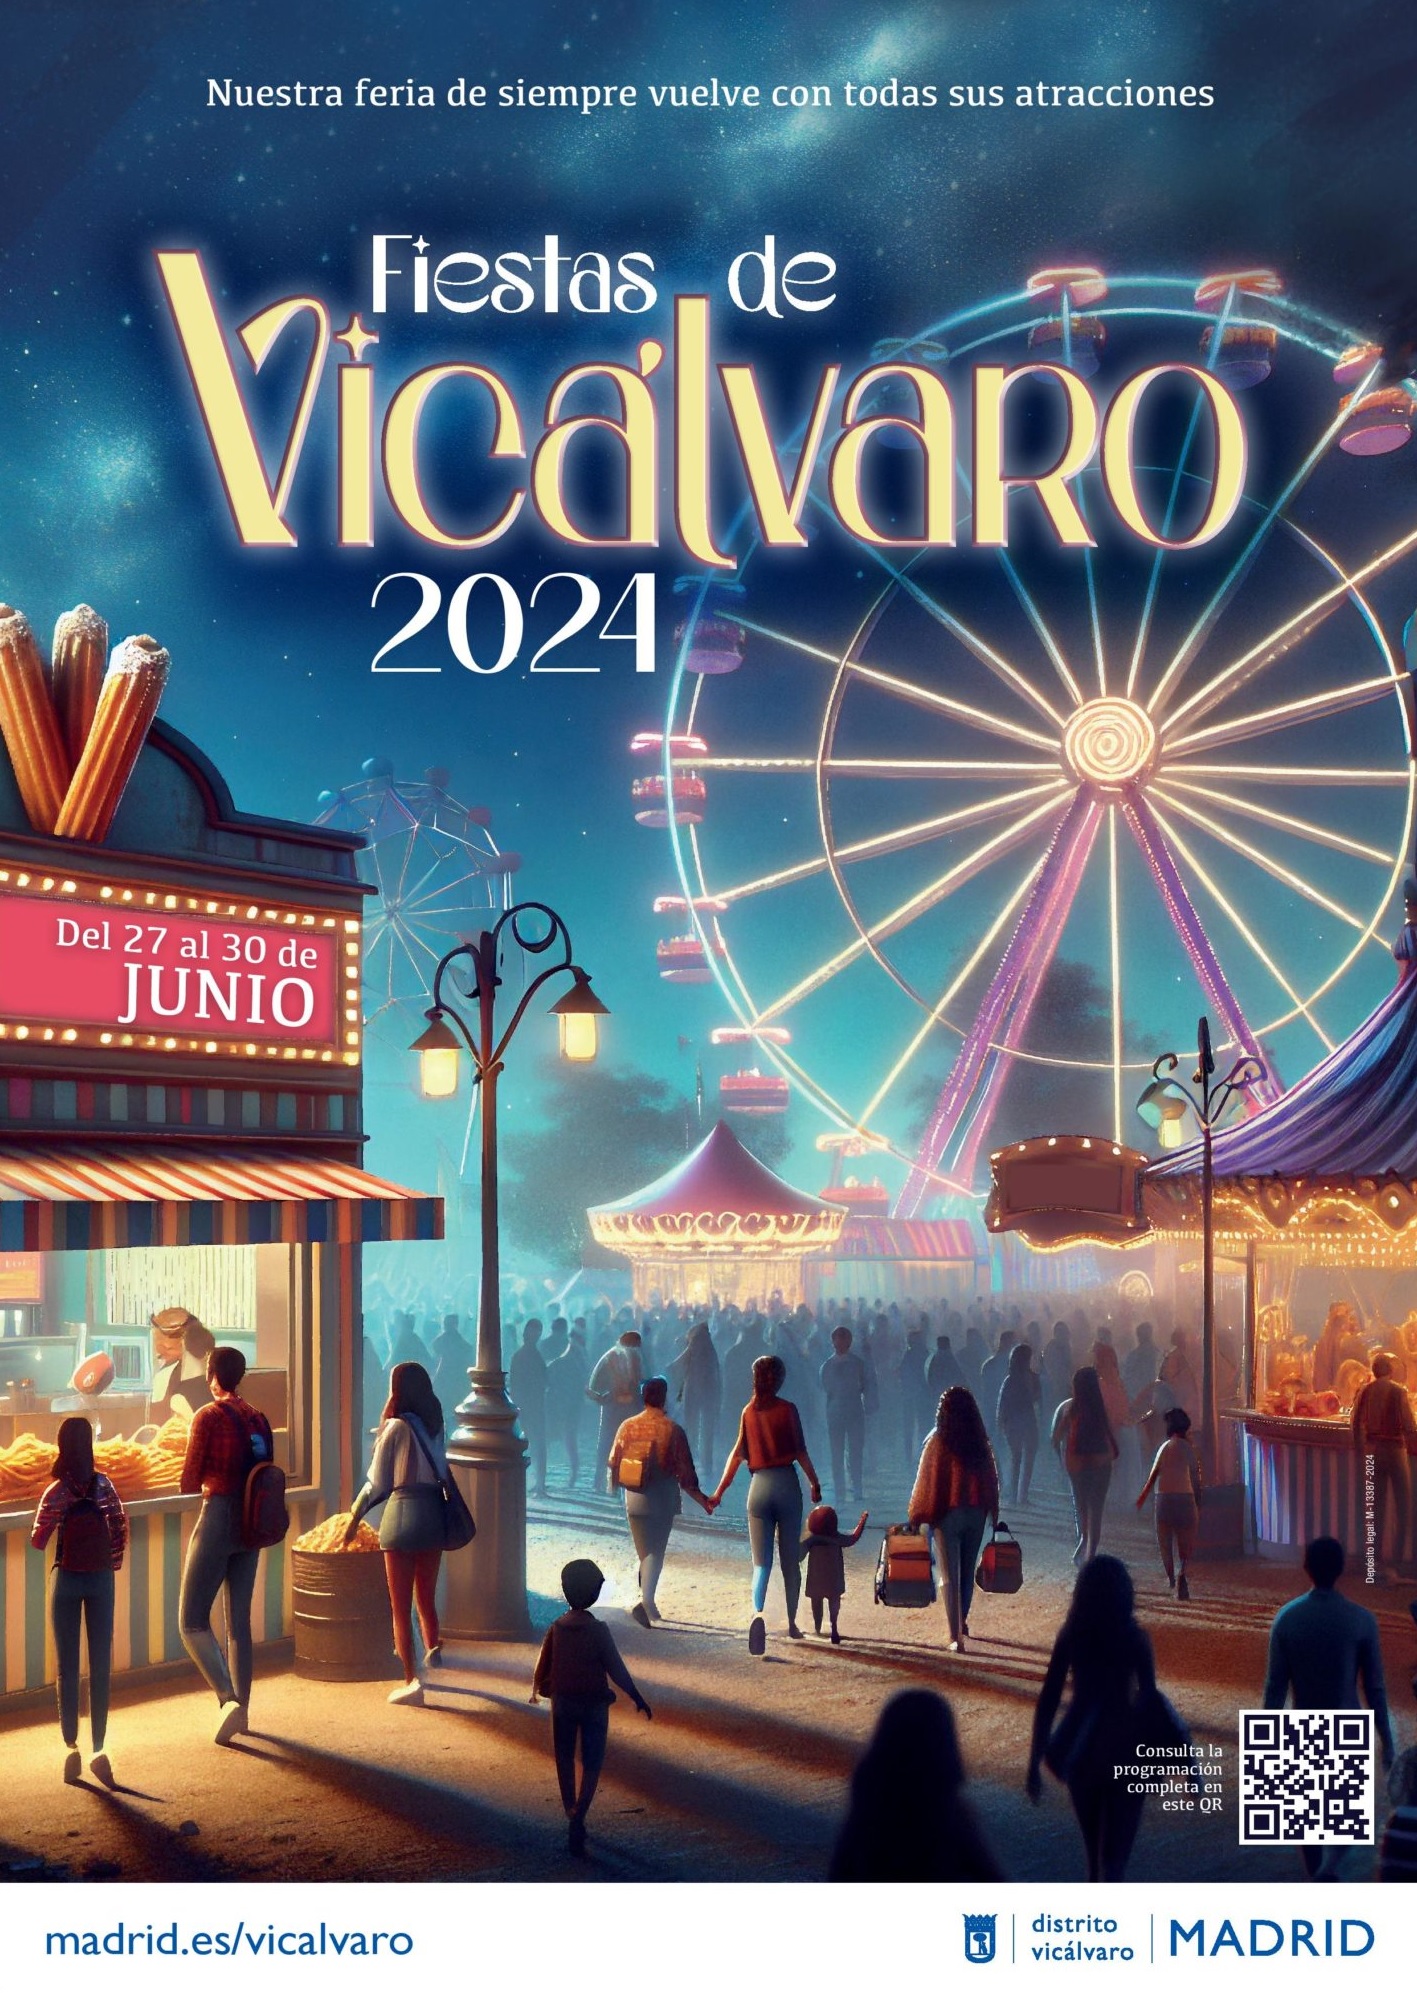 The popular festivities of Vicálvaro recover the fair attractions and reach El Cañaveral - Journal of the City Council of Madrid